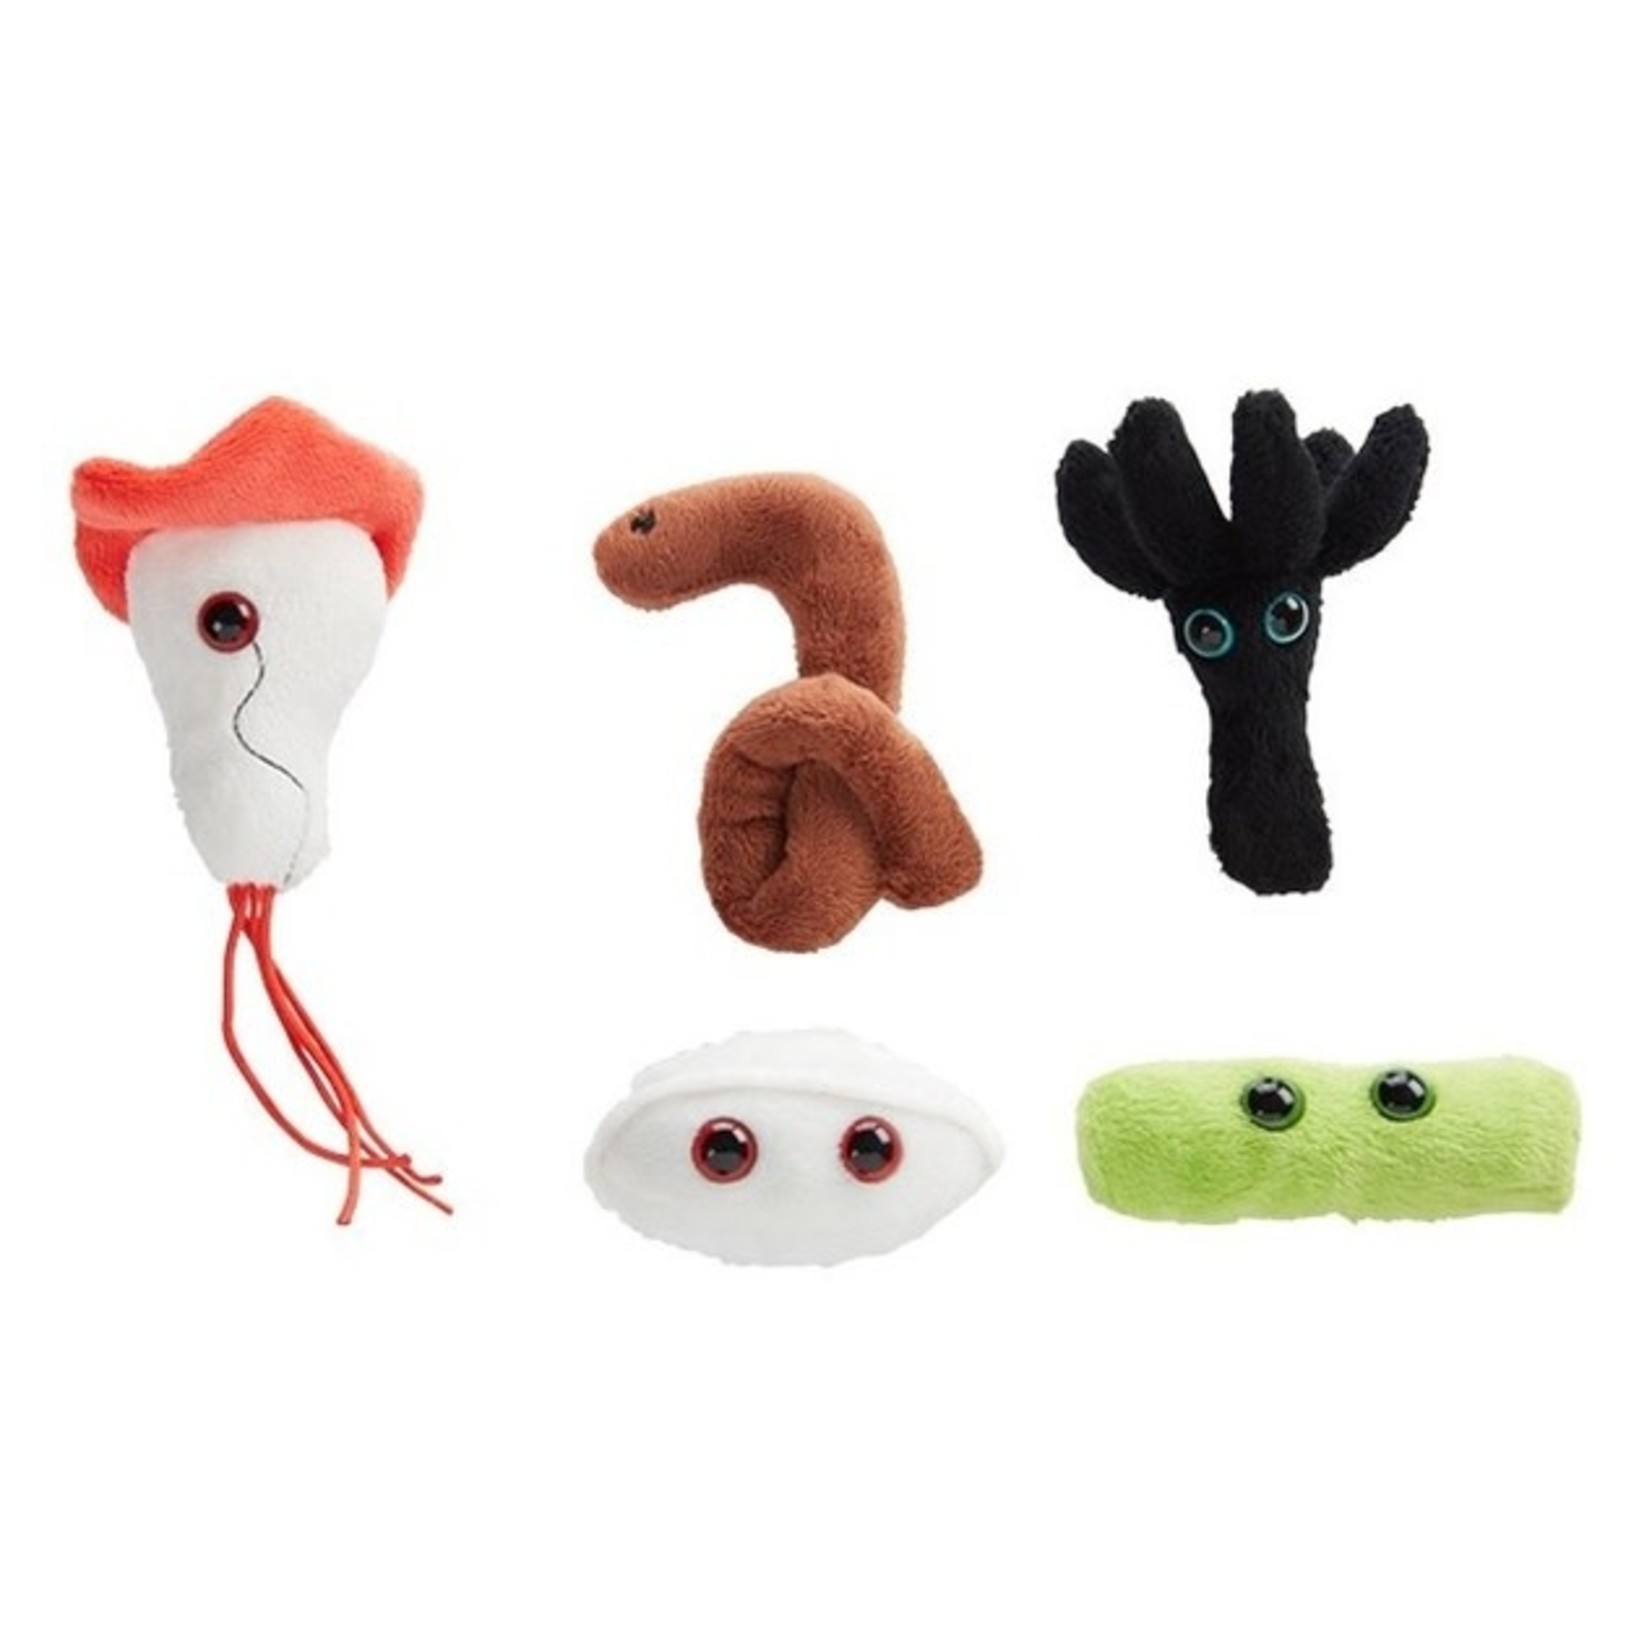 Science and Technology Peluches Biohazards